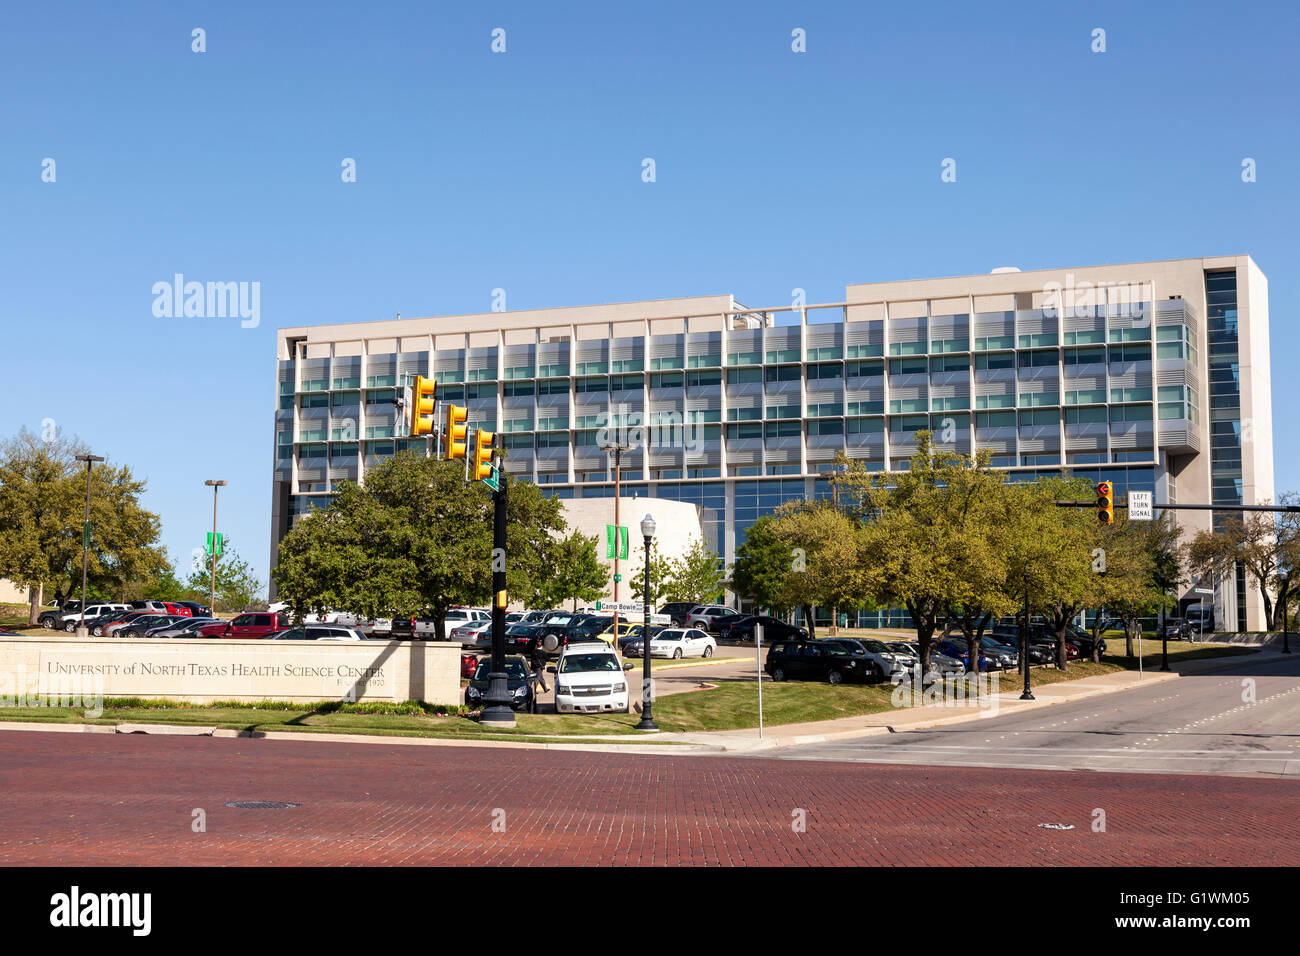 The University of North Texas Health Science Center in the city of Fort Worth Stock Photo